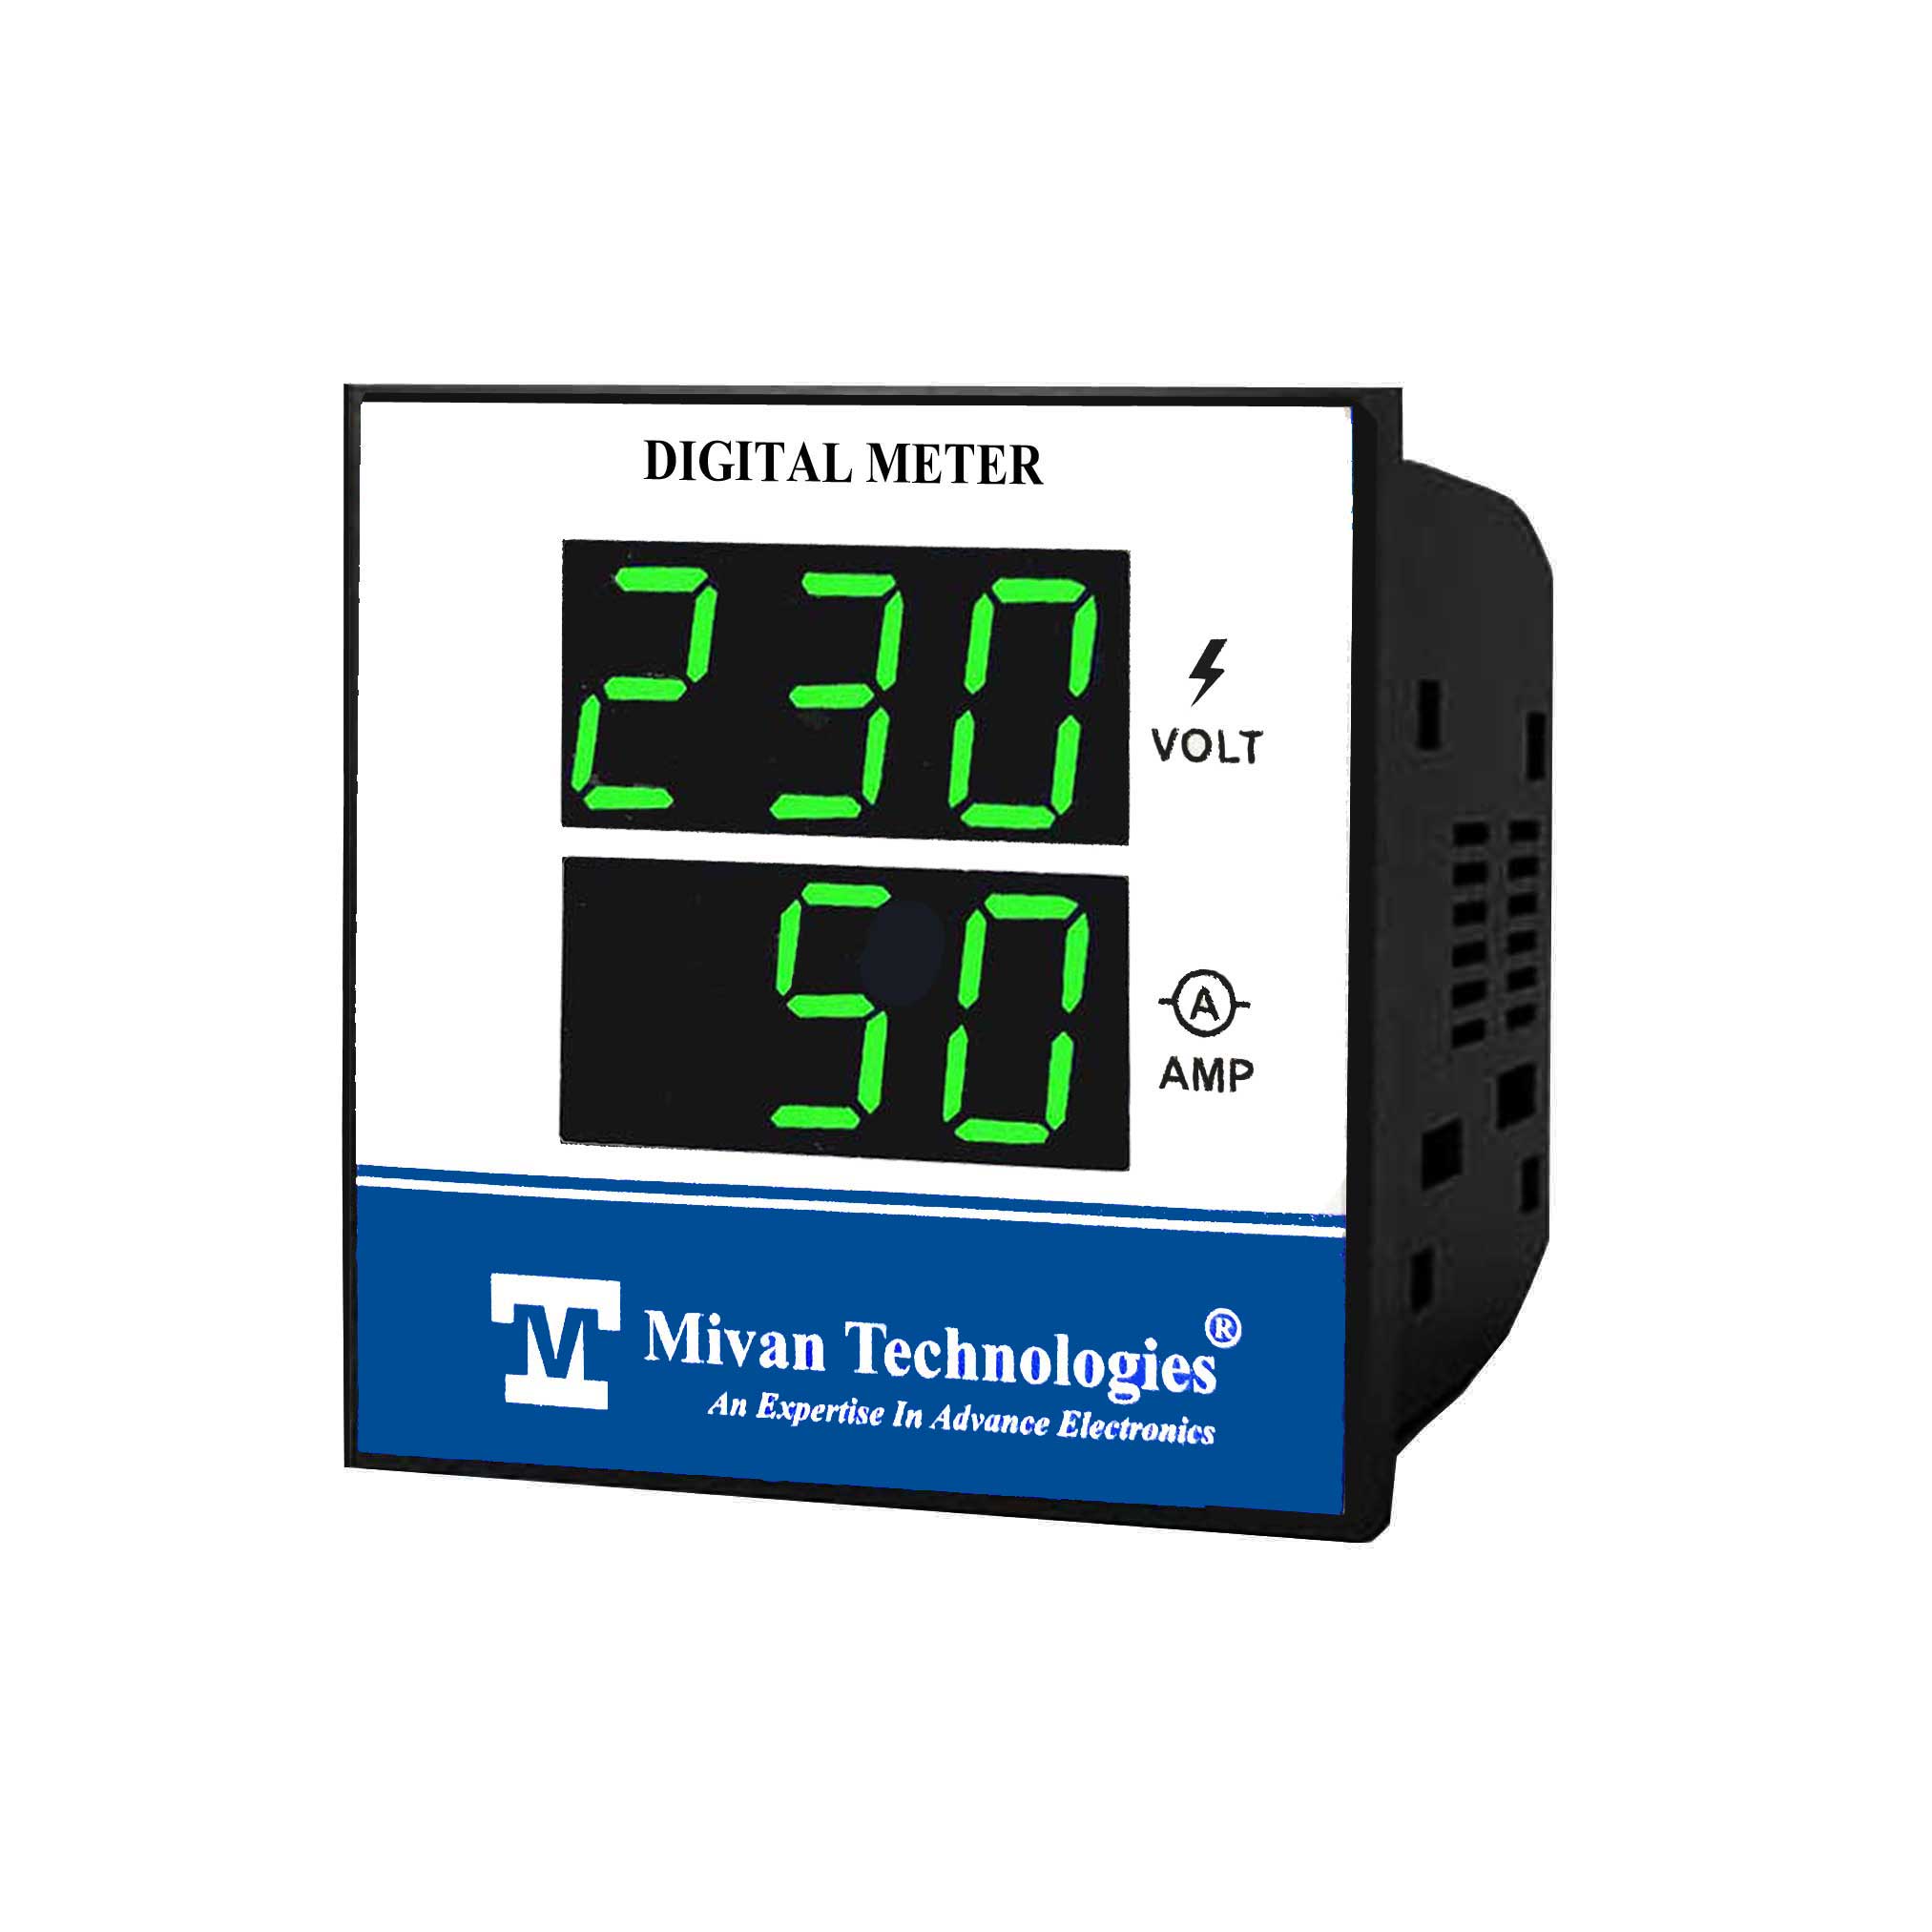 DVM 7212 3 phase digital volt and ampere meter  with ct panel mounted sensing voltage up to 600 VAC